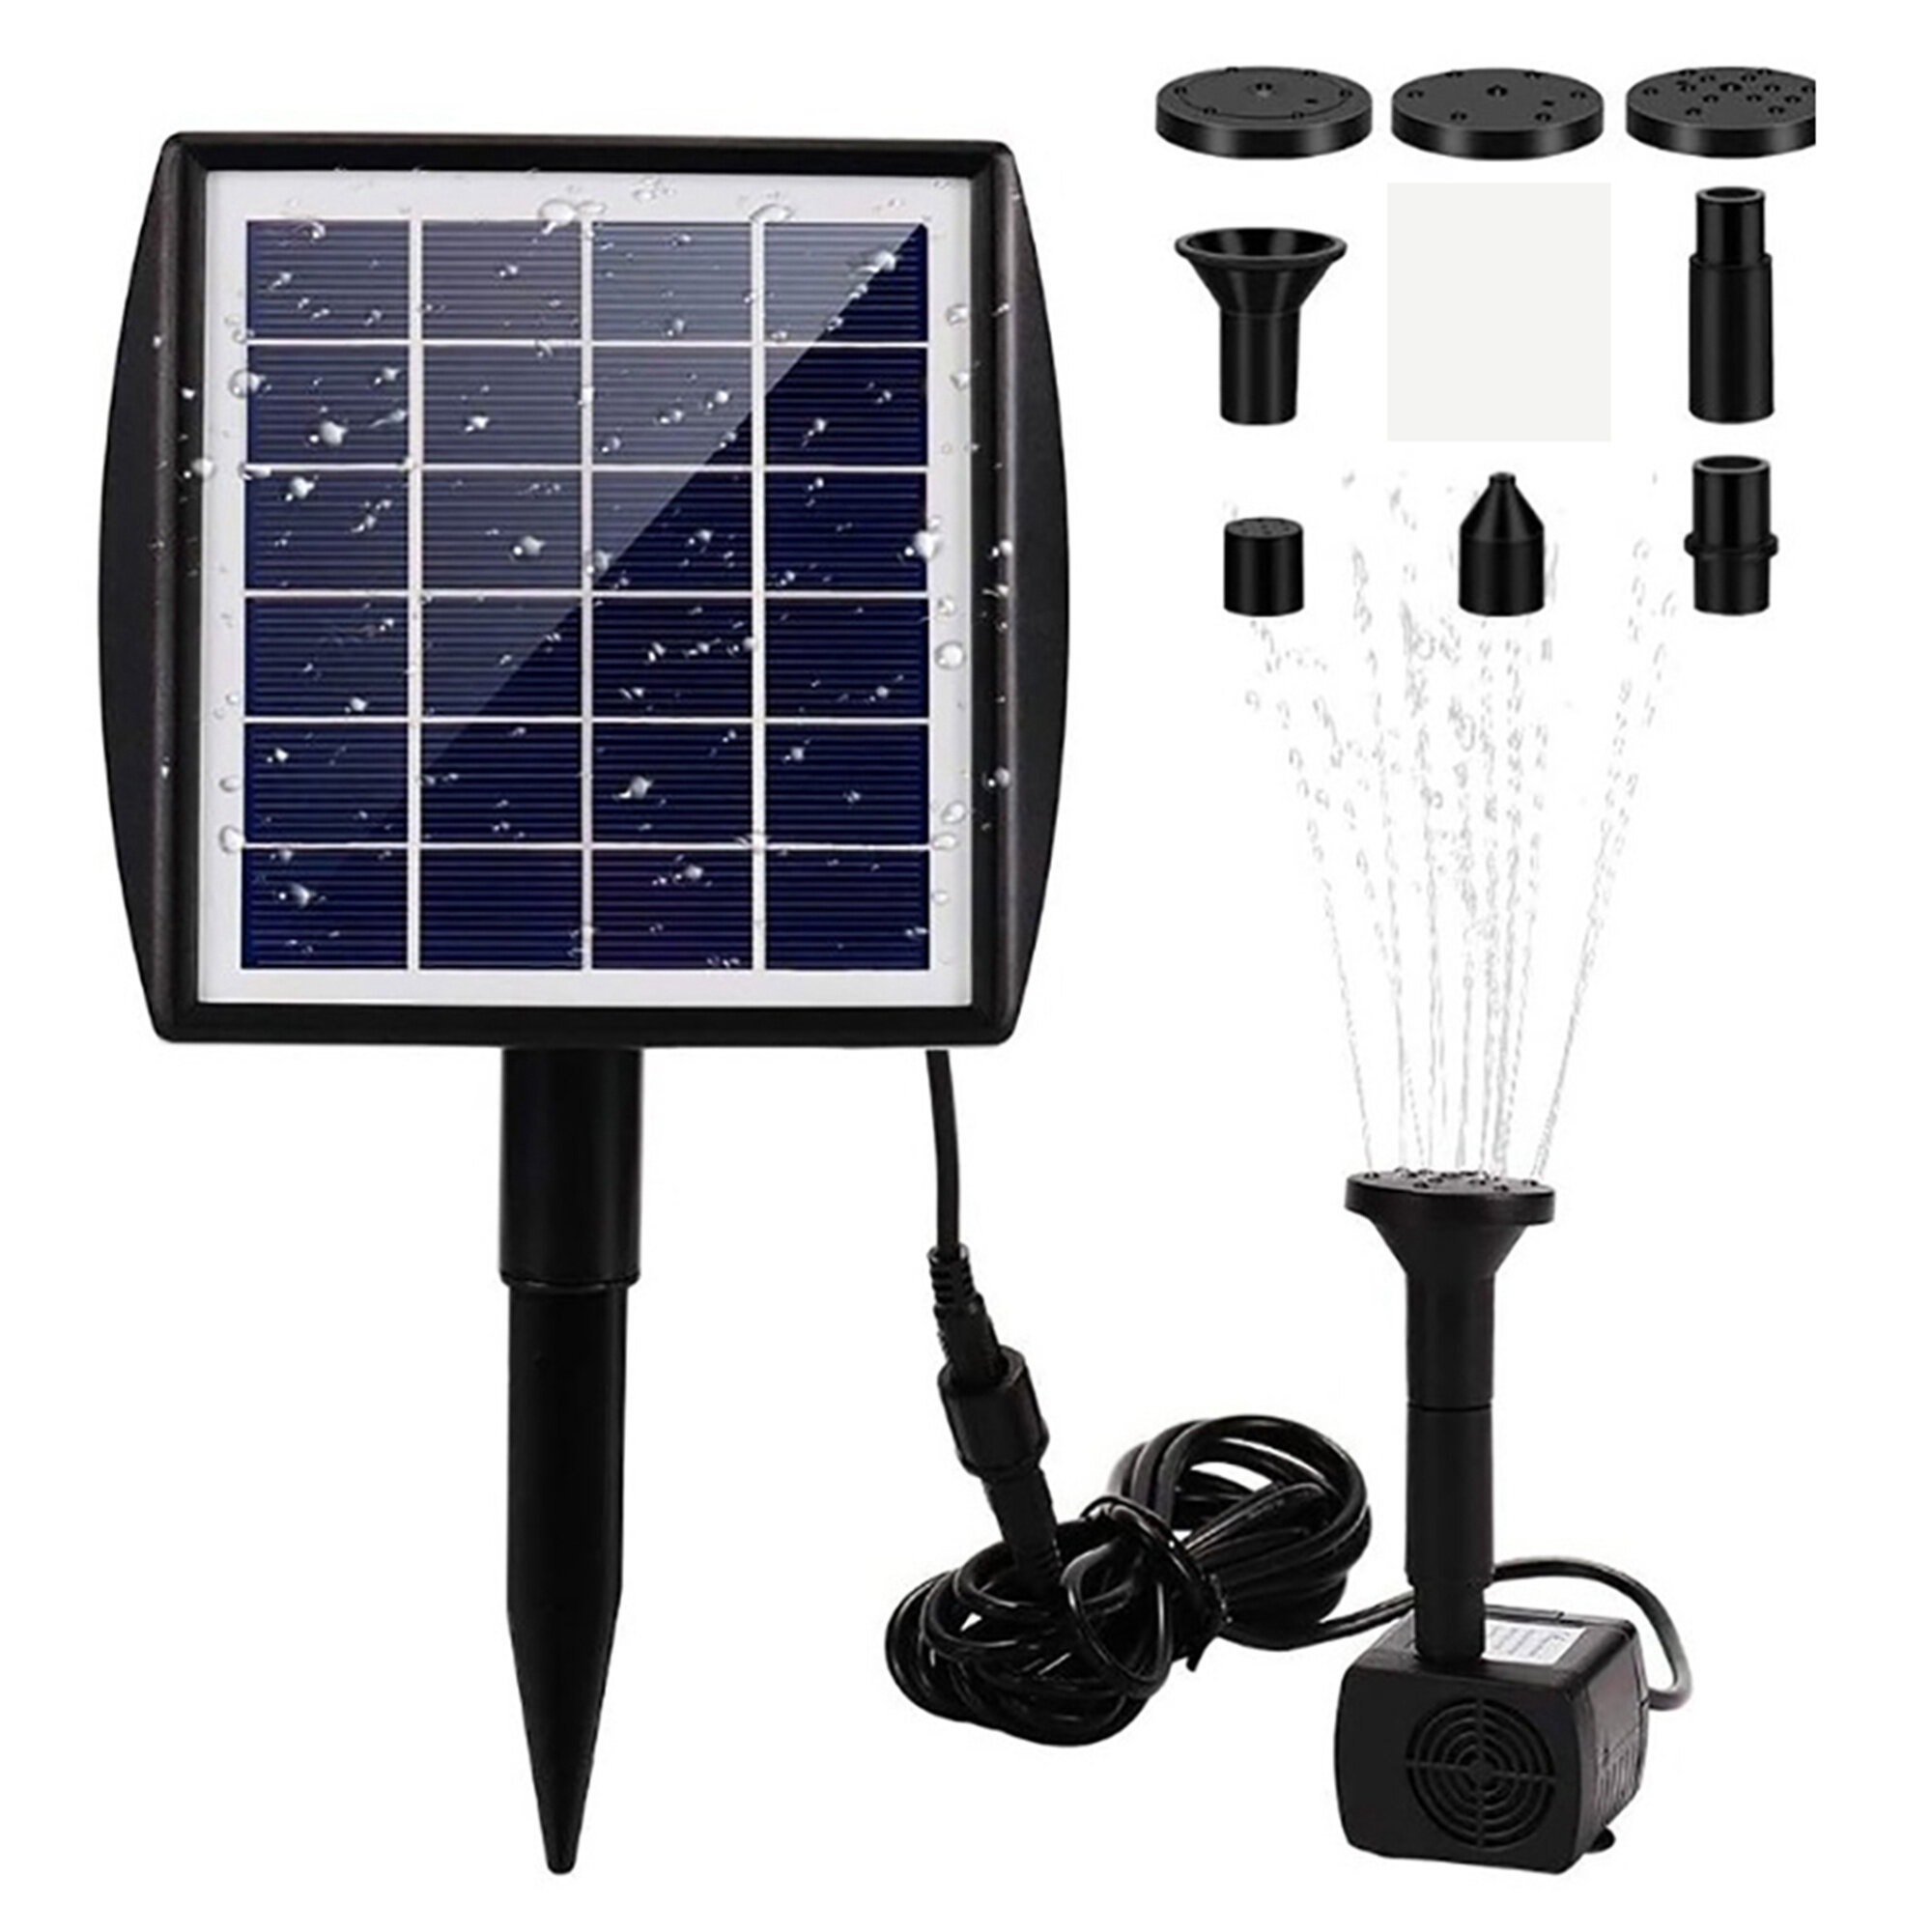 Solar Water Pump for Bird Bath Solar Panel Kit Outdoor Fountain for Outdoor Small Pond Solar Fountain Pump with Panel and Ground Stake Patio Garden and Fish Tank